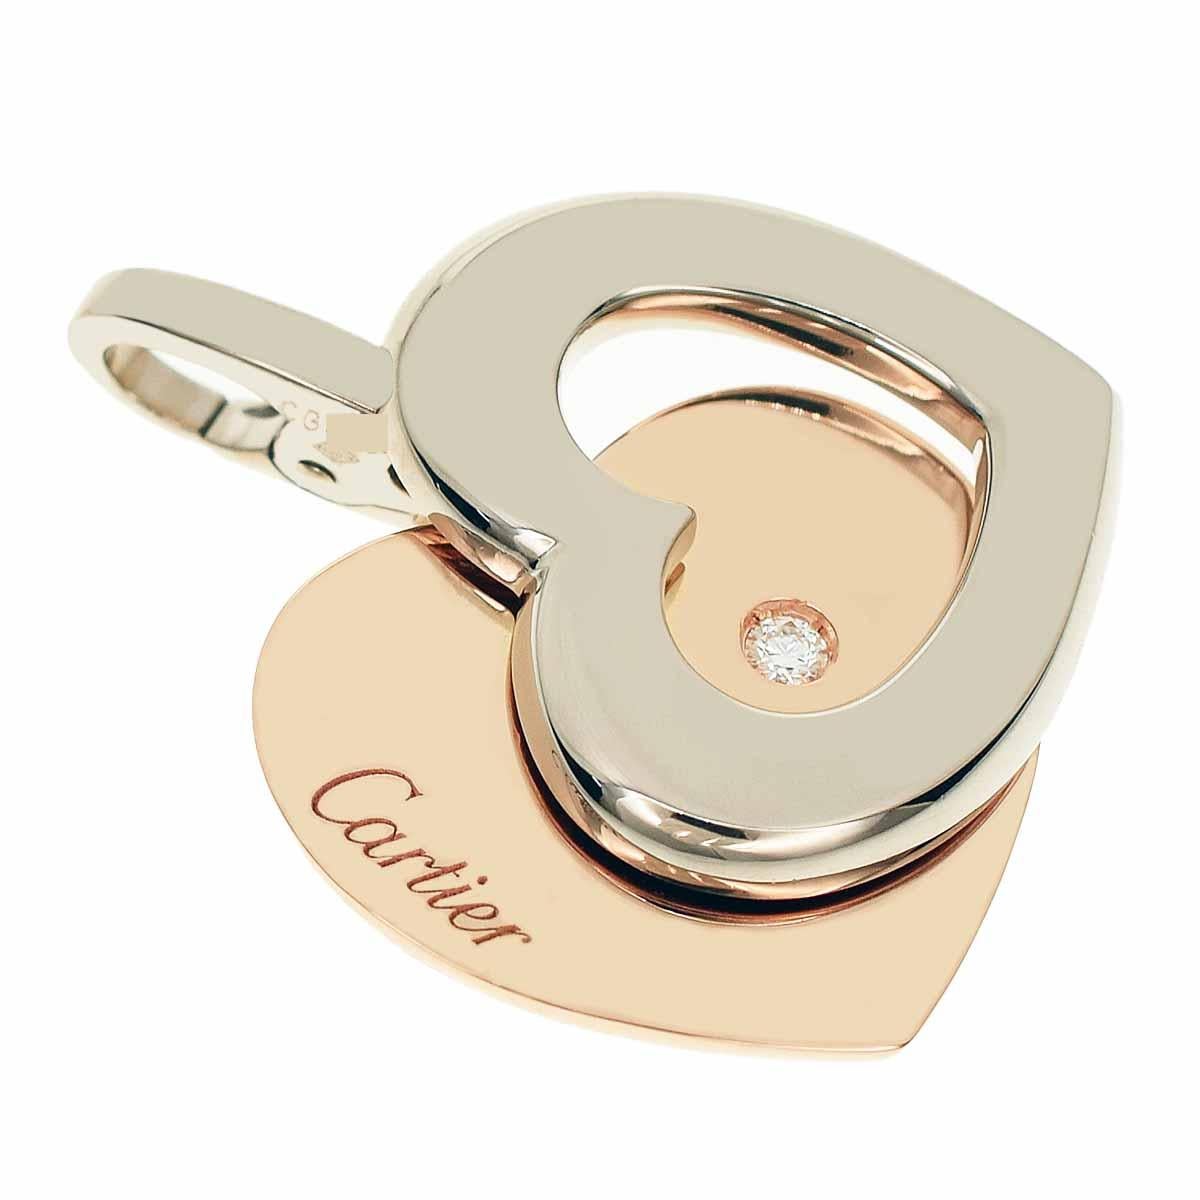 Brand:Cartier
Name:Double heart charm
Material:1P diamond, 750 K18 PG WG pink gold white gold
Weight:11.4g（Approx)
Size:H28mm×W19mm / H1.15in×W0.74in（Approx)
Comes with:Cartier Box, Pouch, Cartier Certificate (Oct 2004)